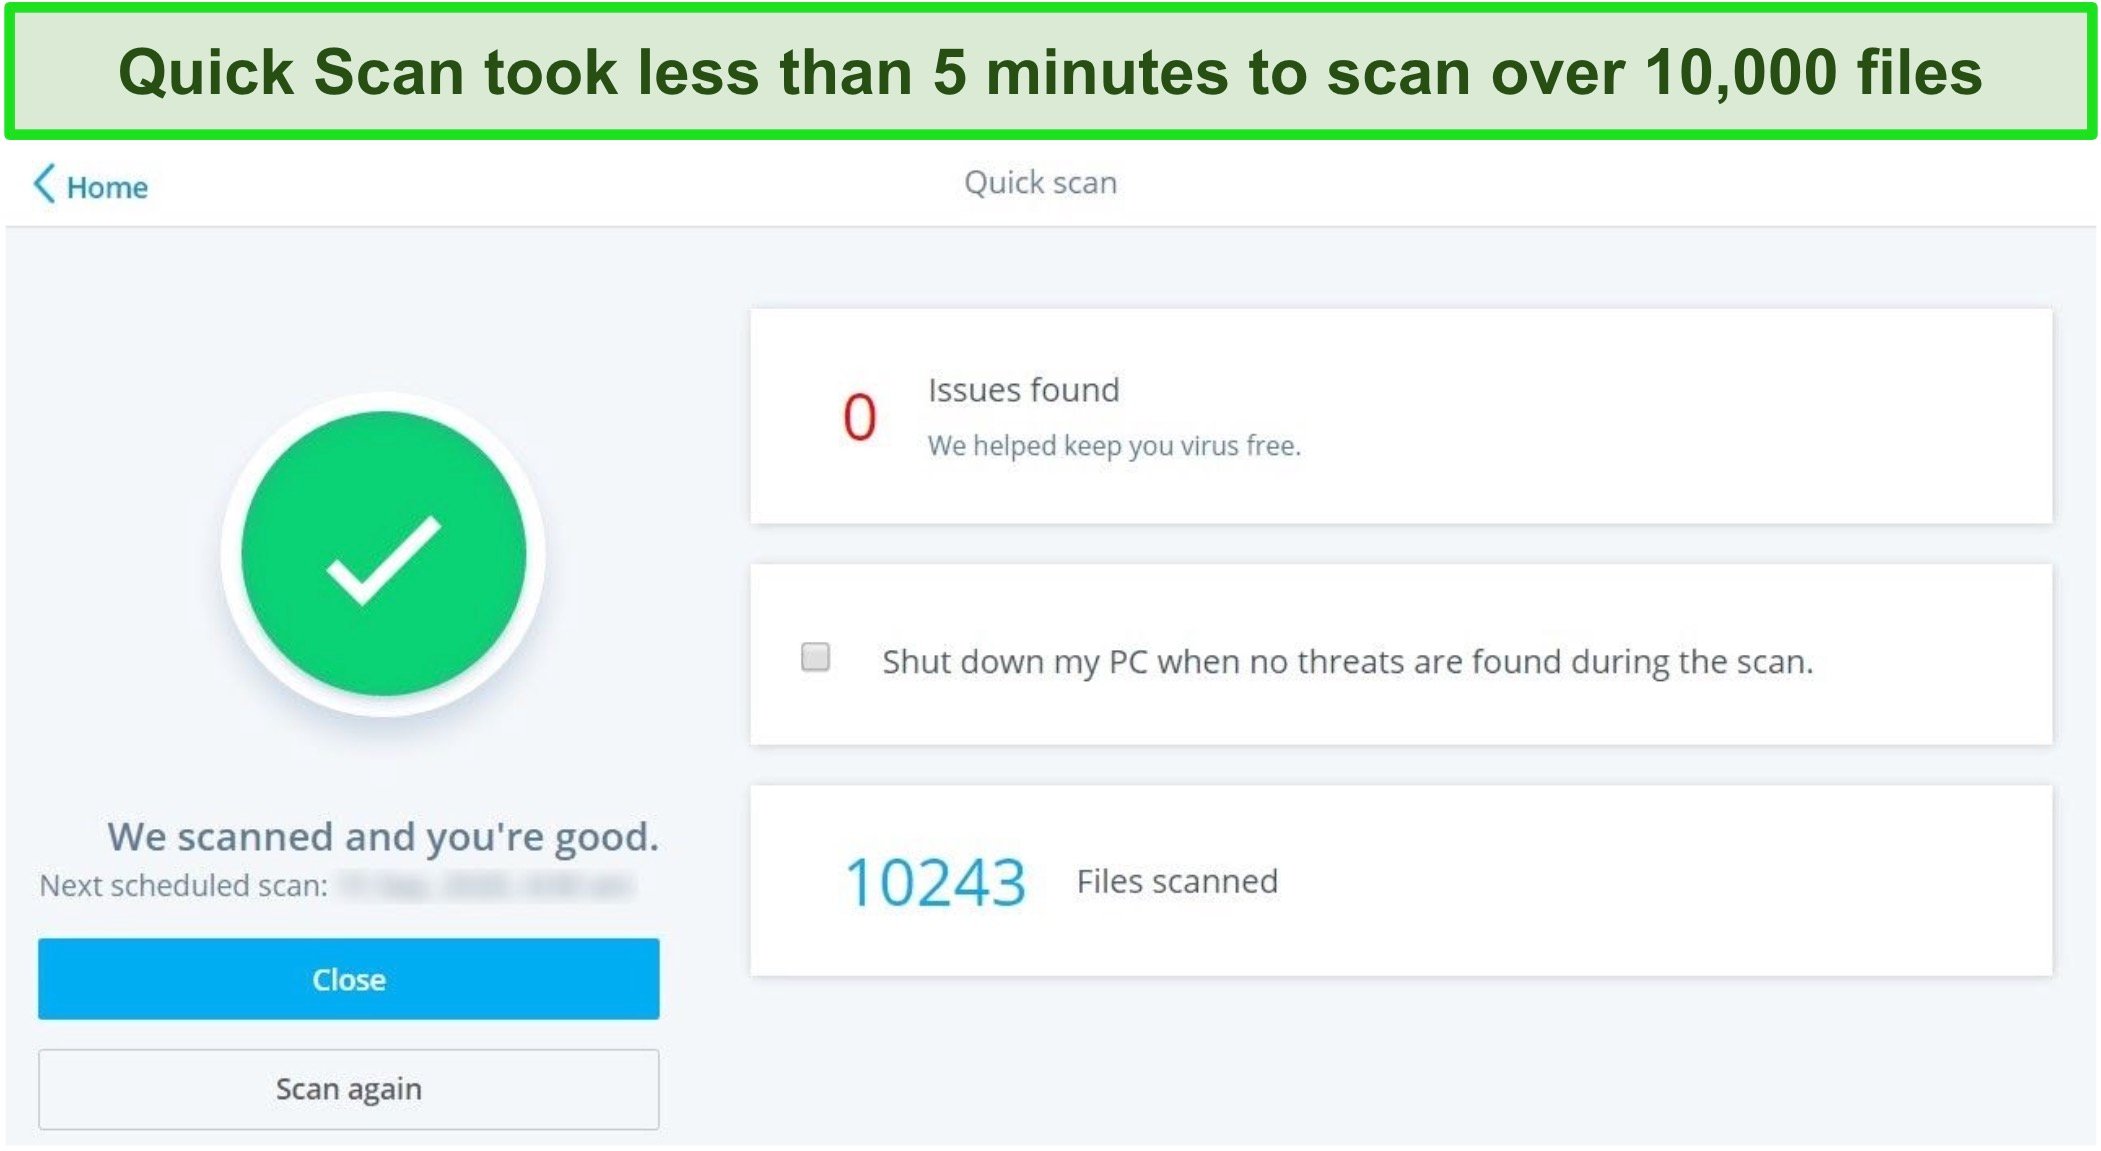 mcafee scan plus removal tool